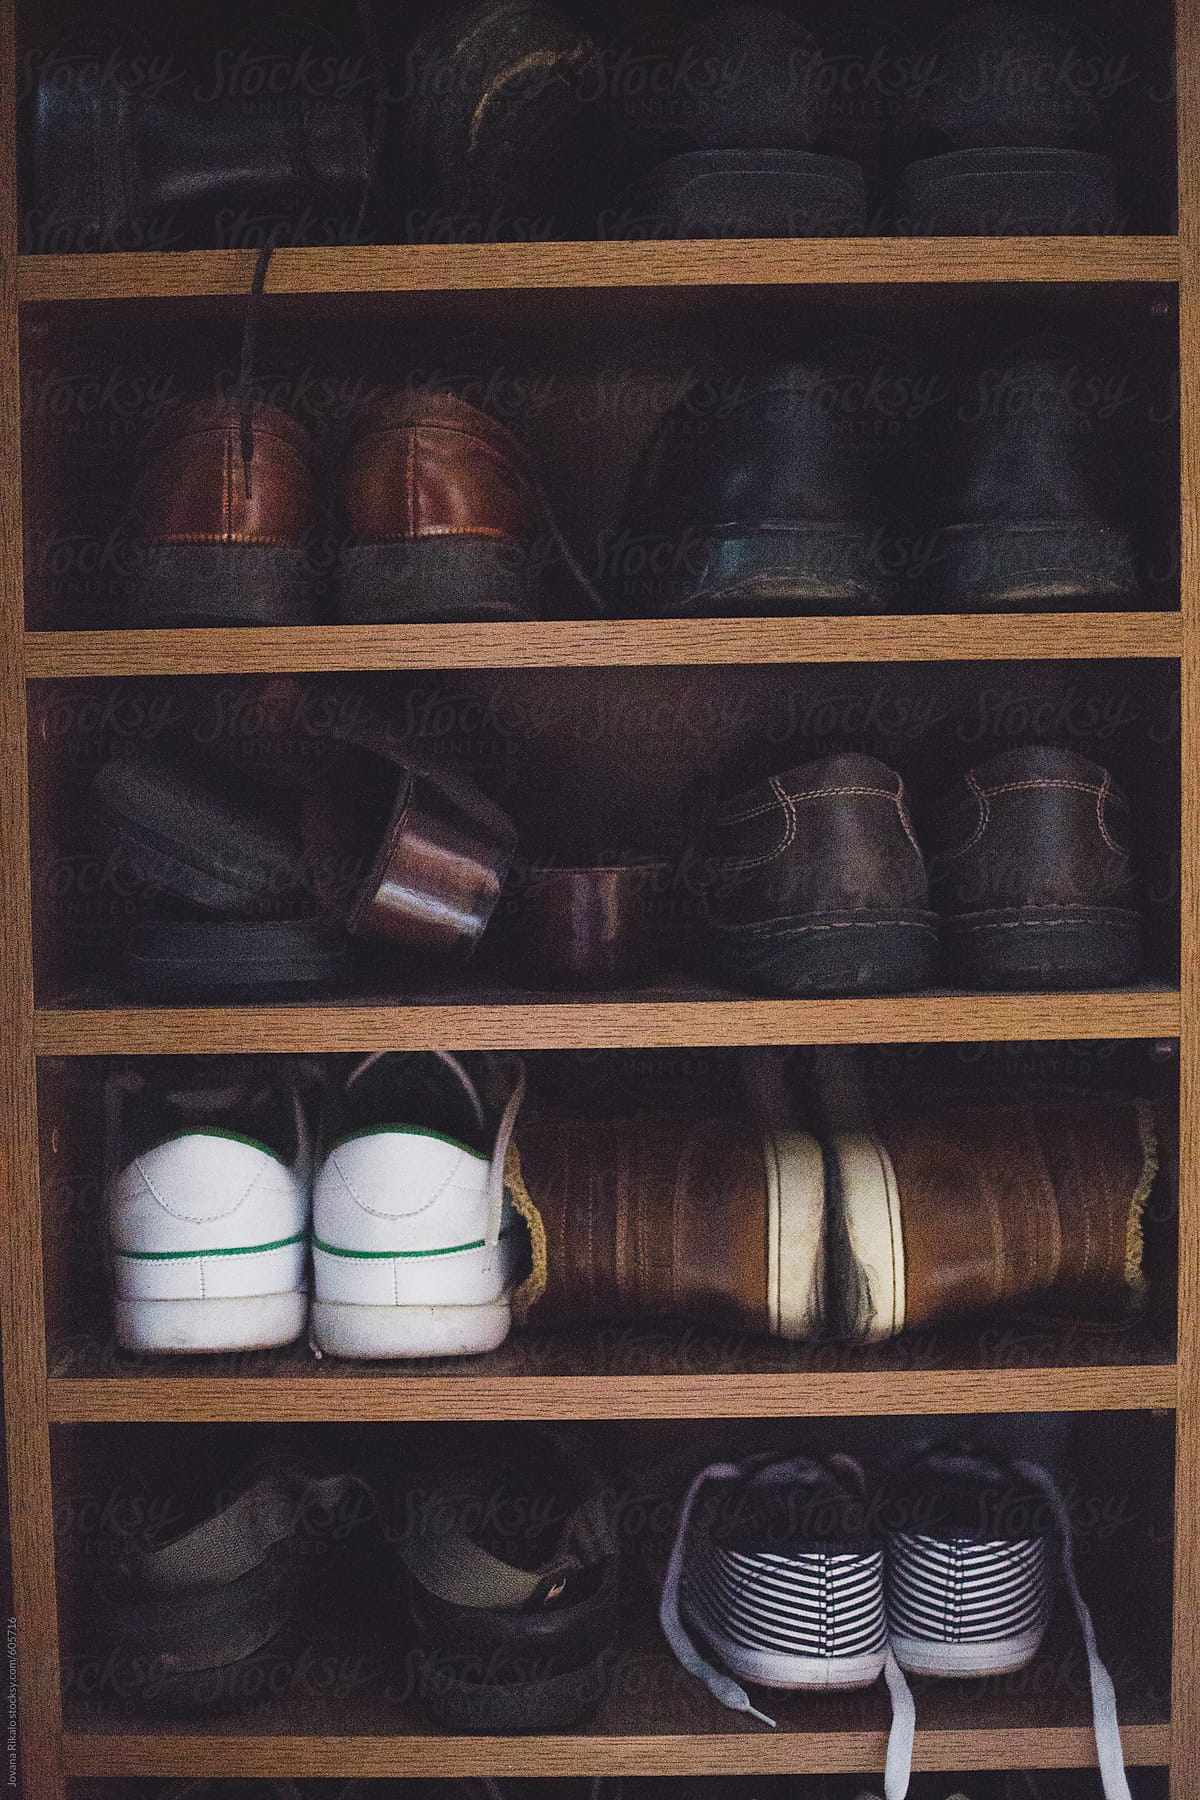 Collection of shoes